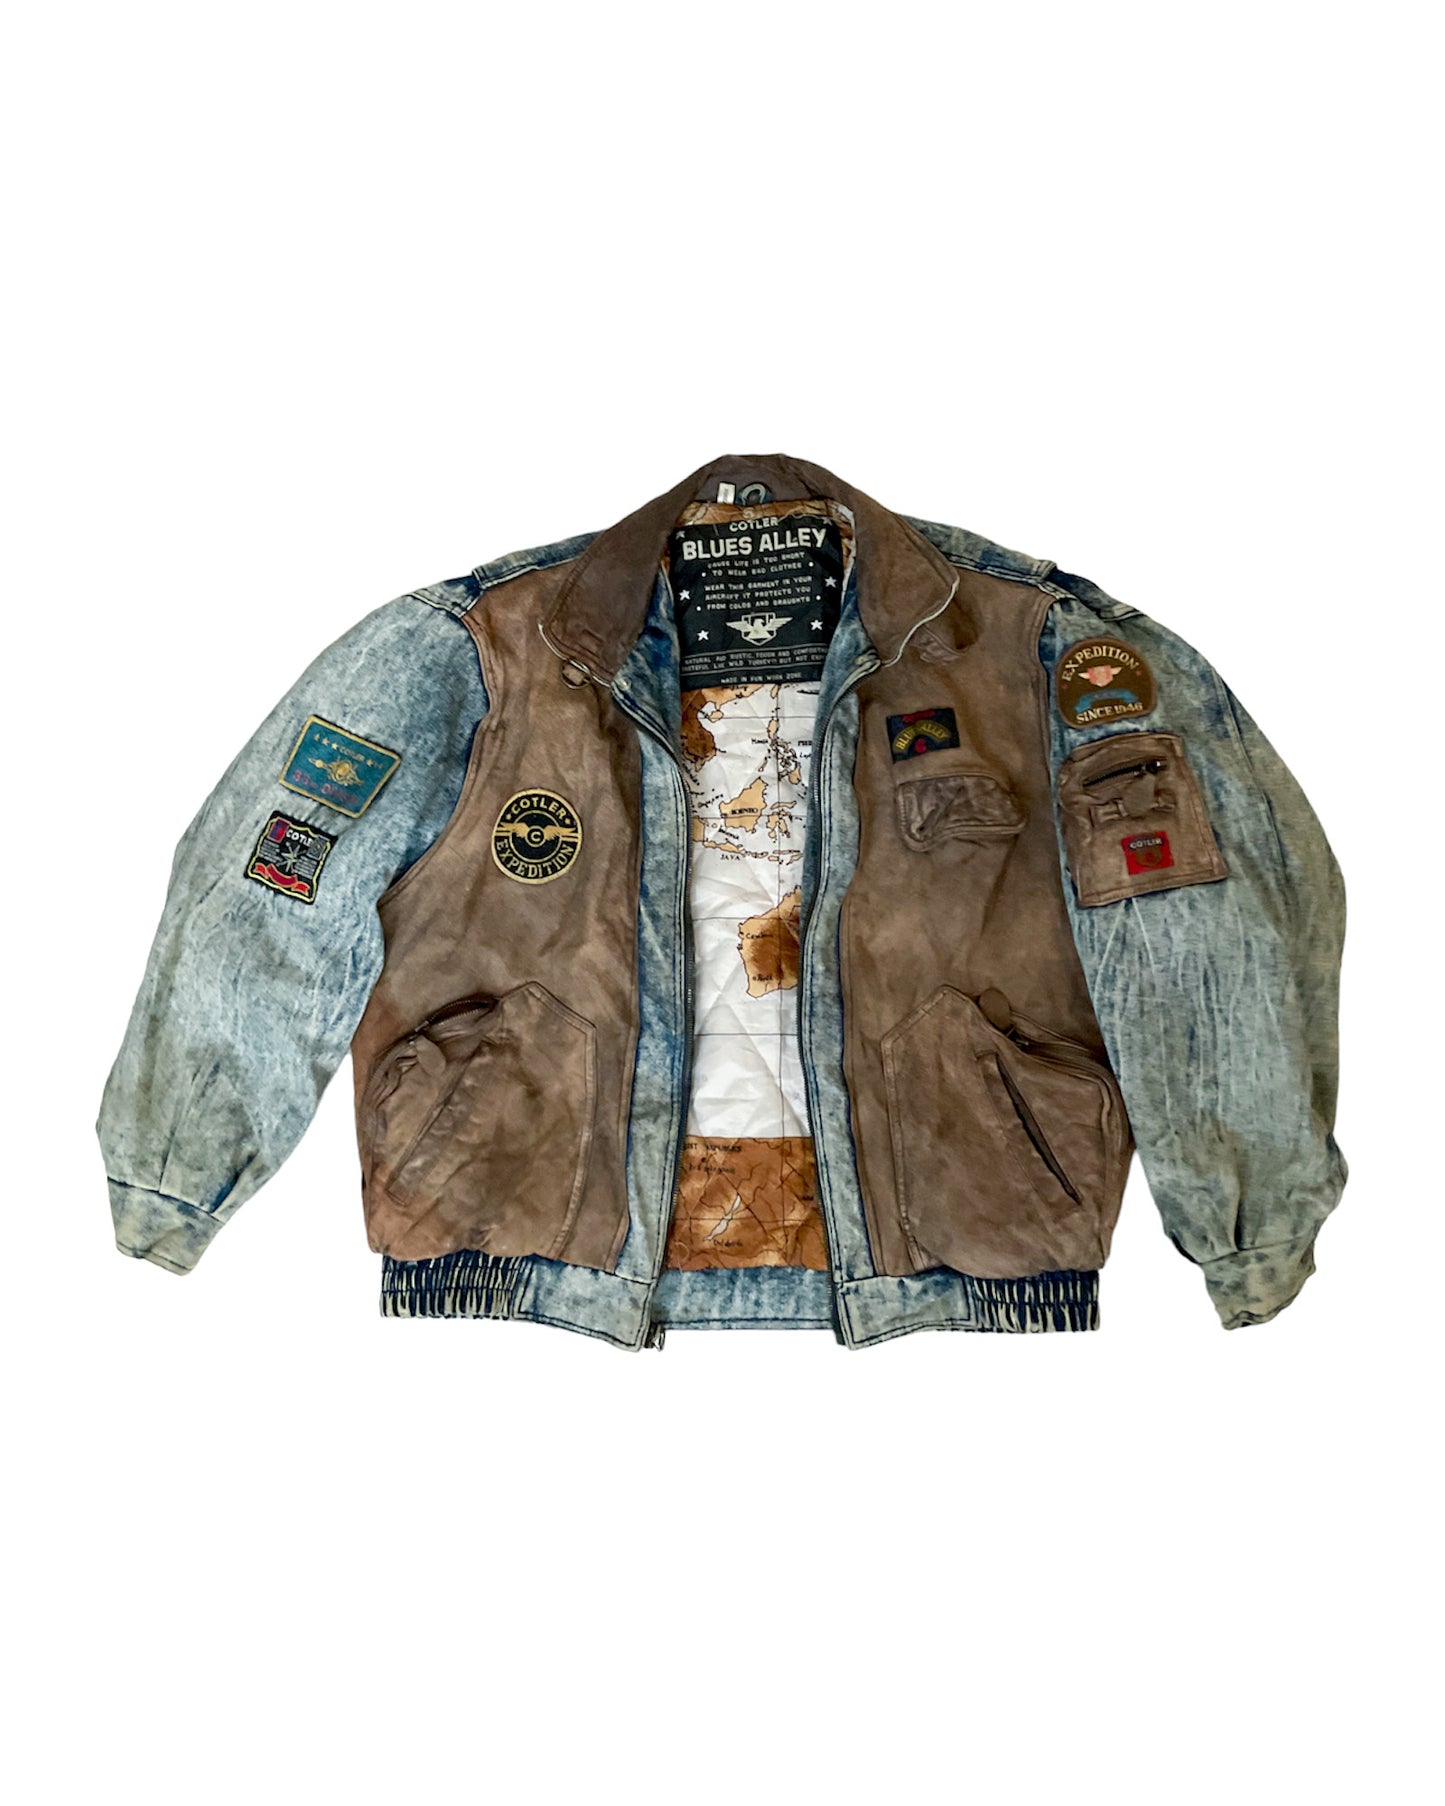 Vintage Road trip Denim and Leather Patch Jacket